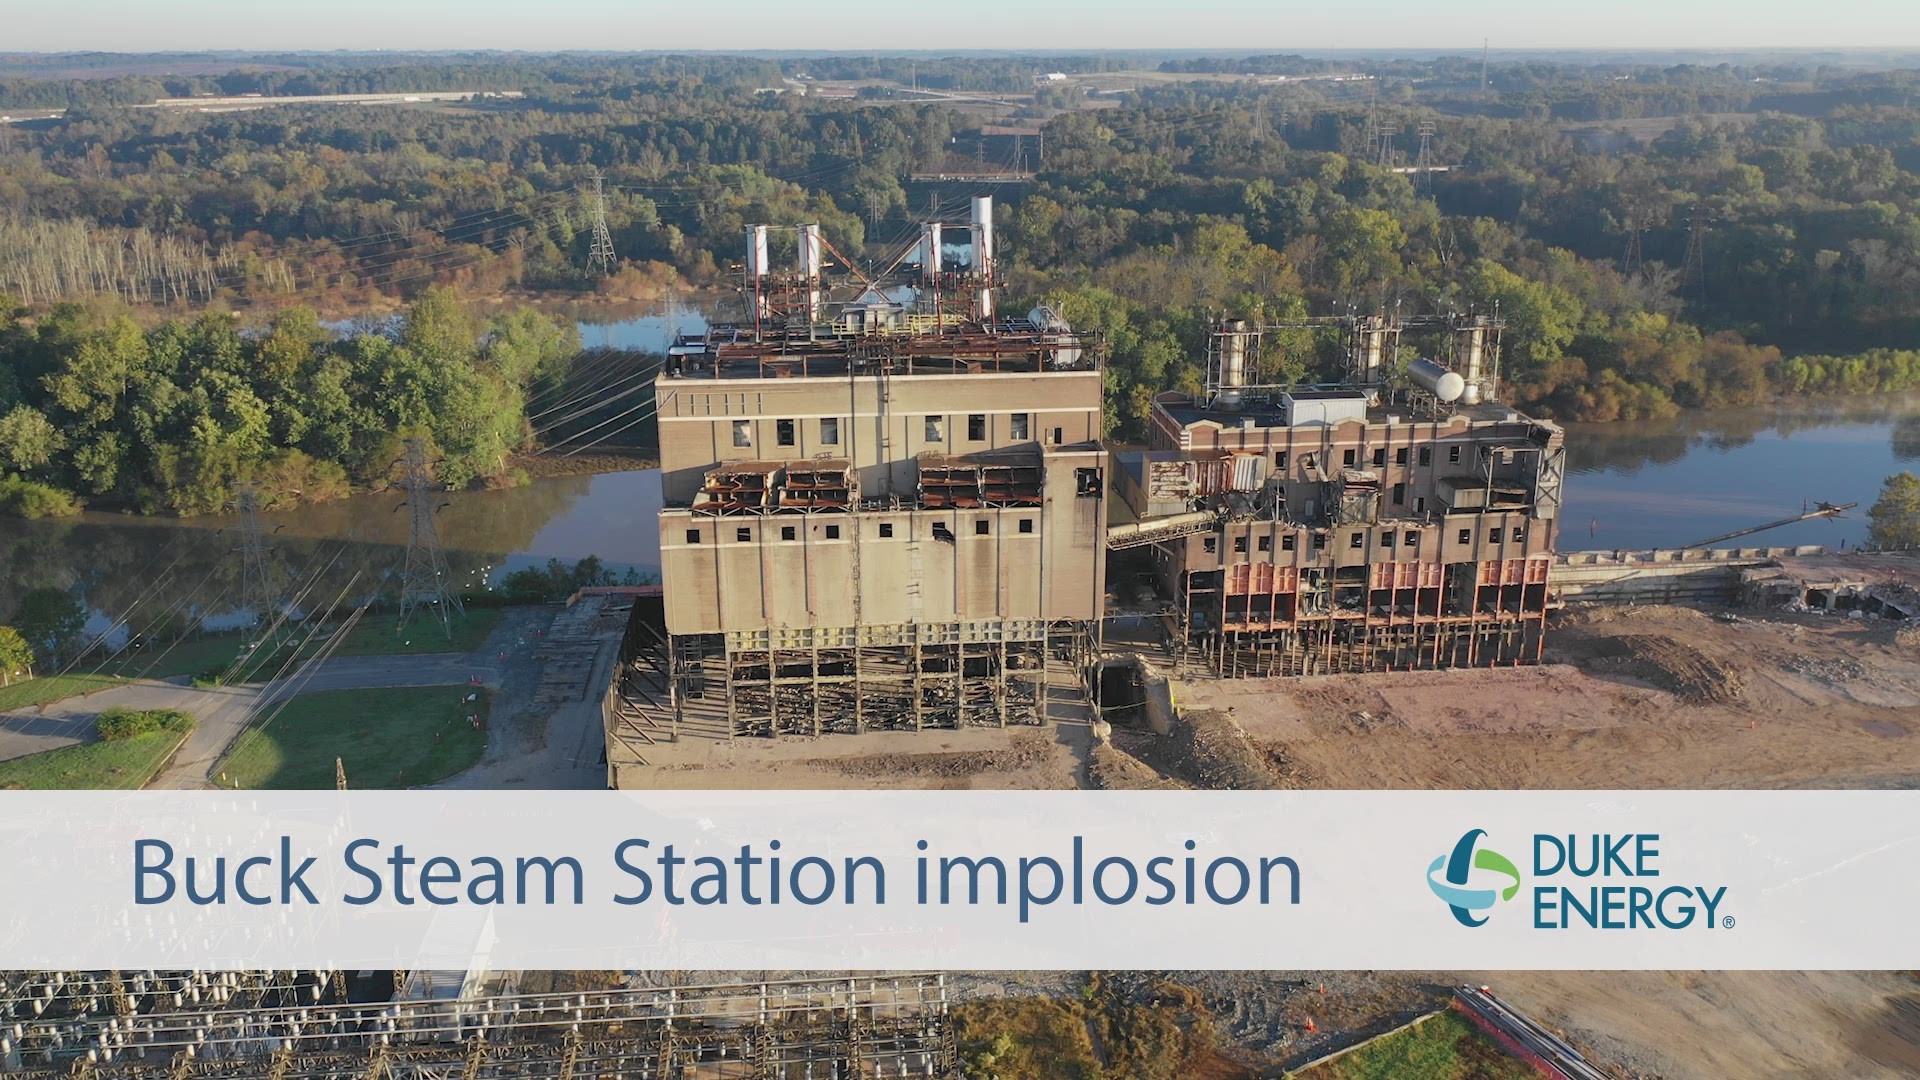 Nearly 300 charges of explosives brings Duke Energy's Buck Steam Station in Salisbury, N.C. Teh planned decommission happened Friday, Oct. 19 when the final four units of the coal-fired generating station were imploded.